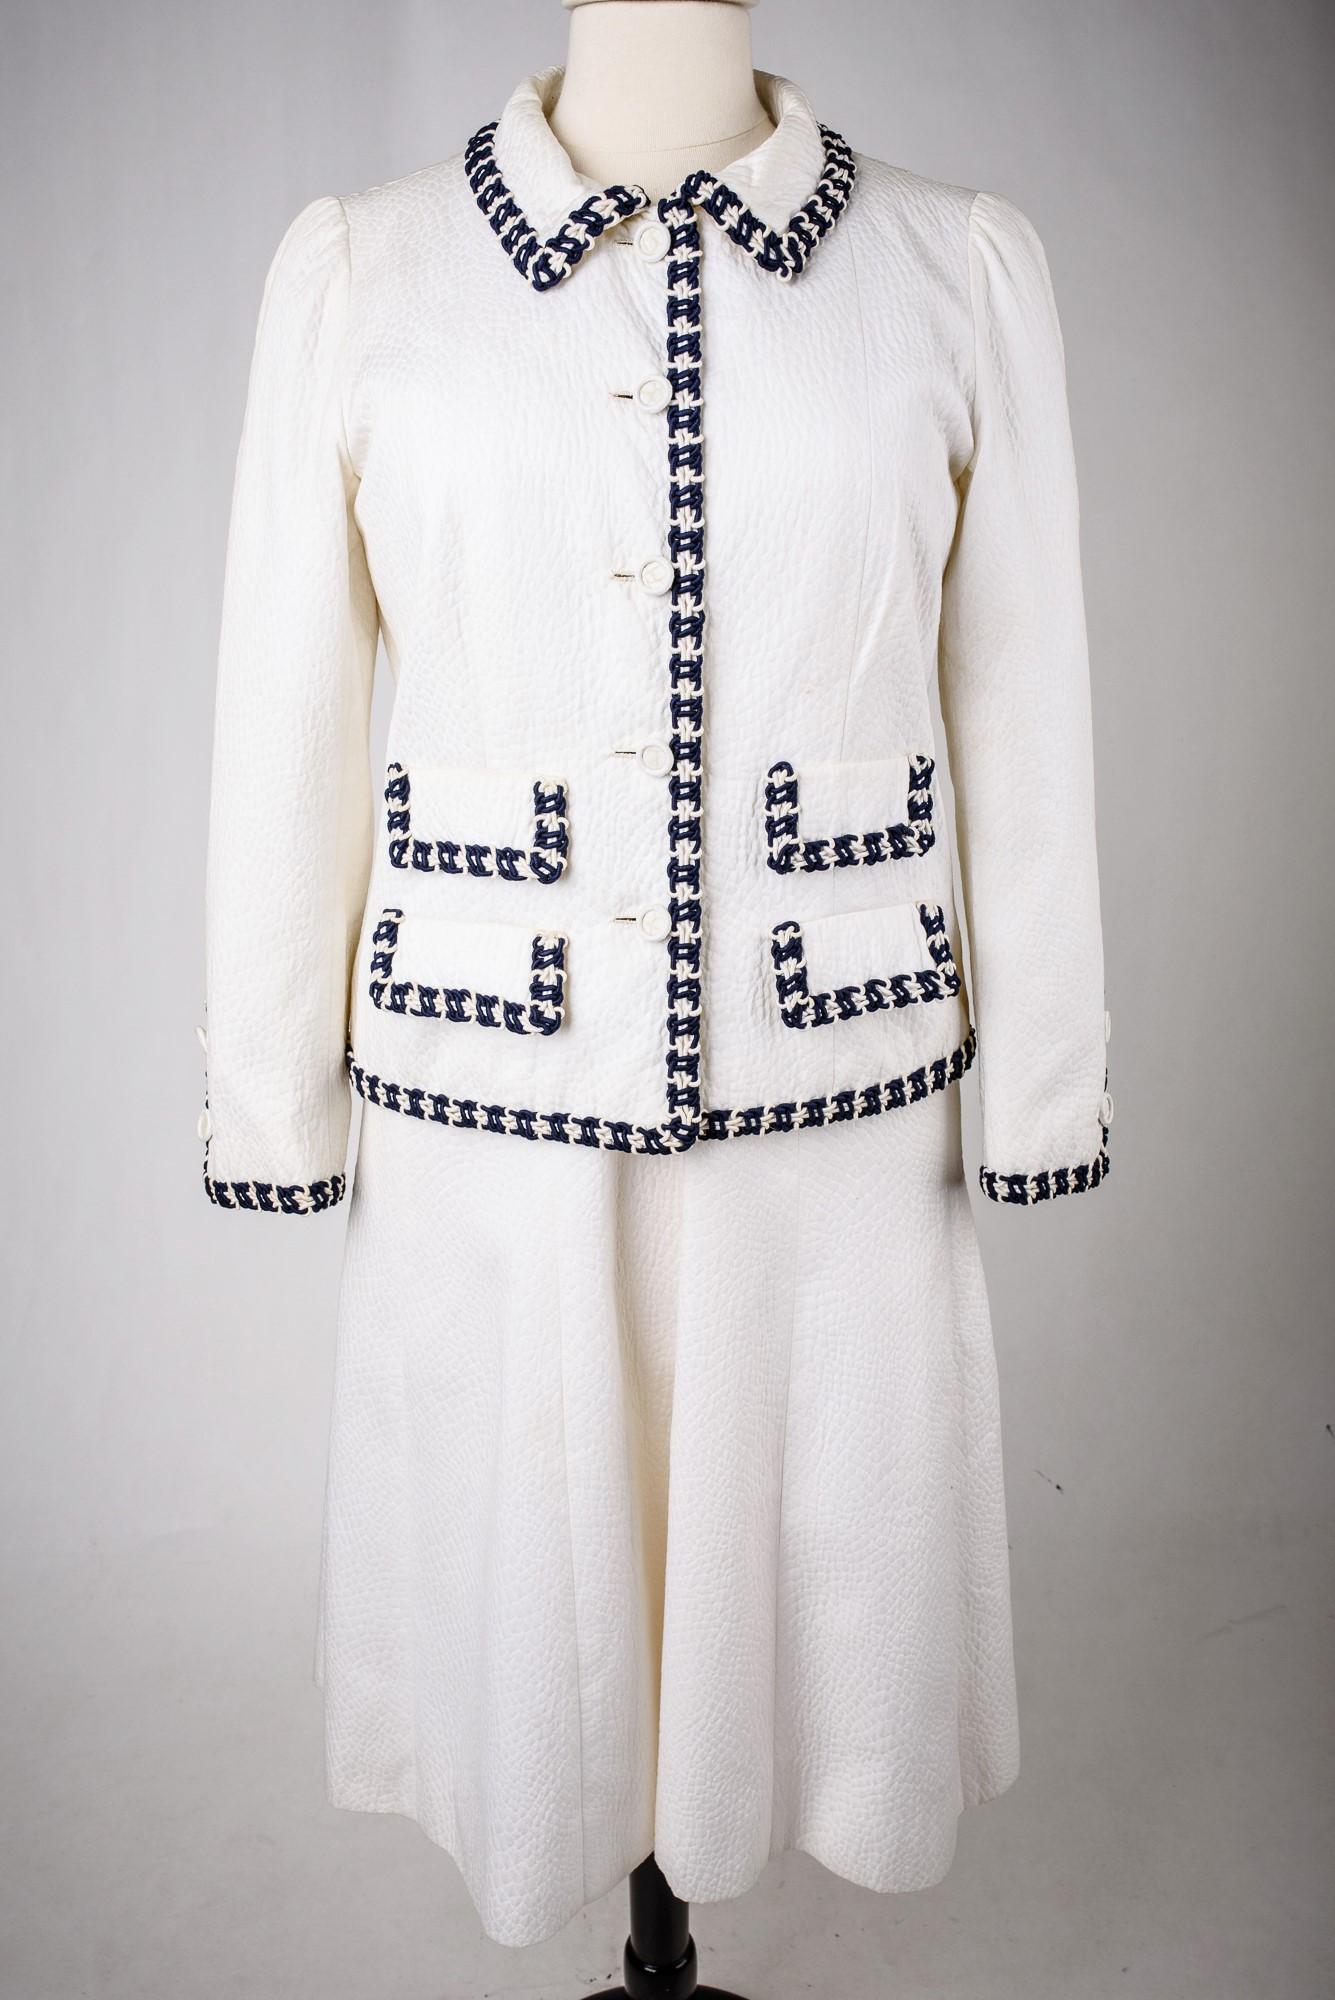 Women's A Chanel Couture white cotton Set numbered 59989/59990 Circa 1970